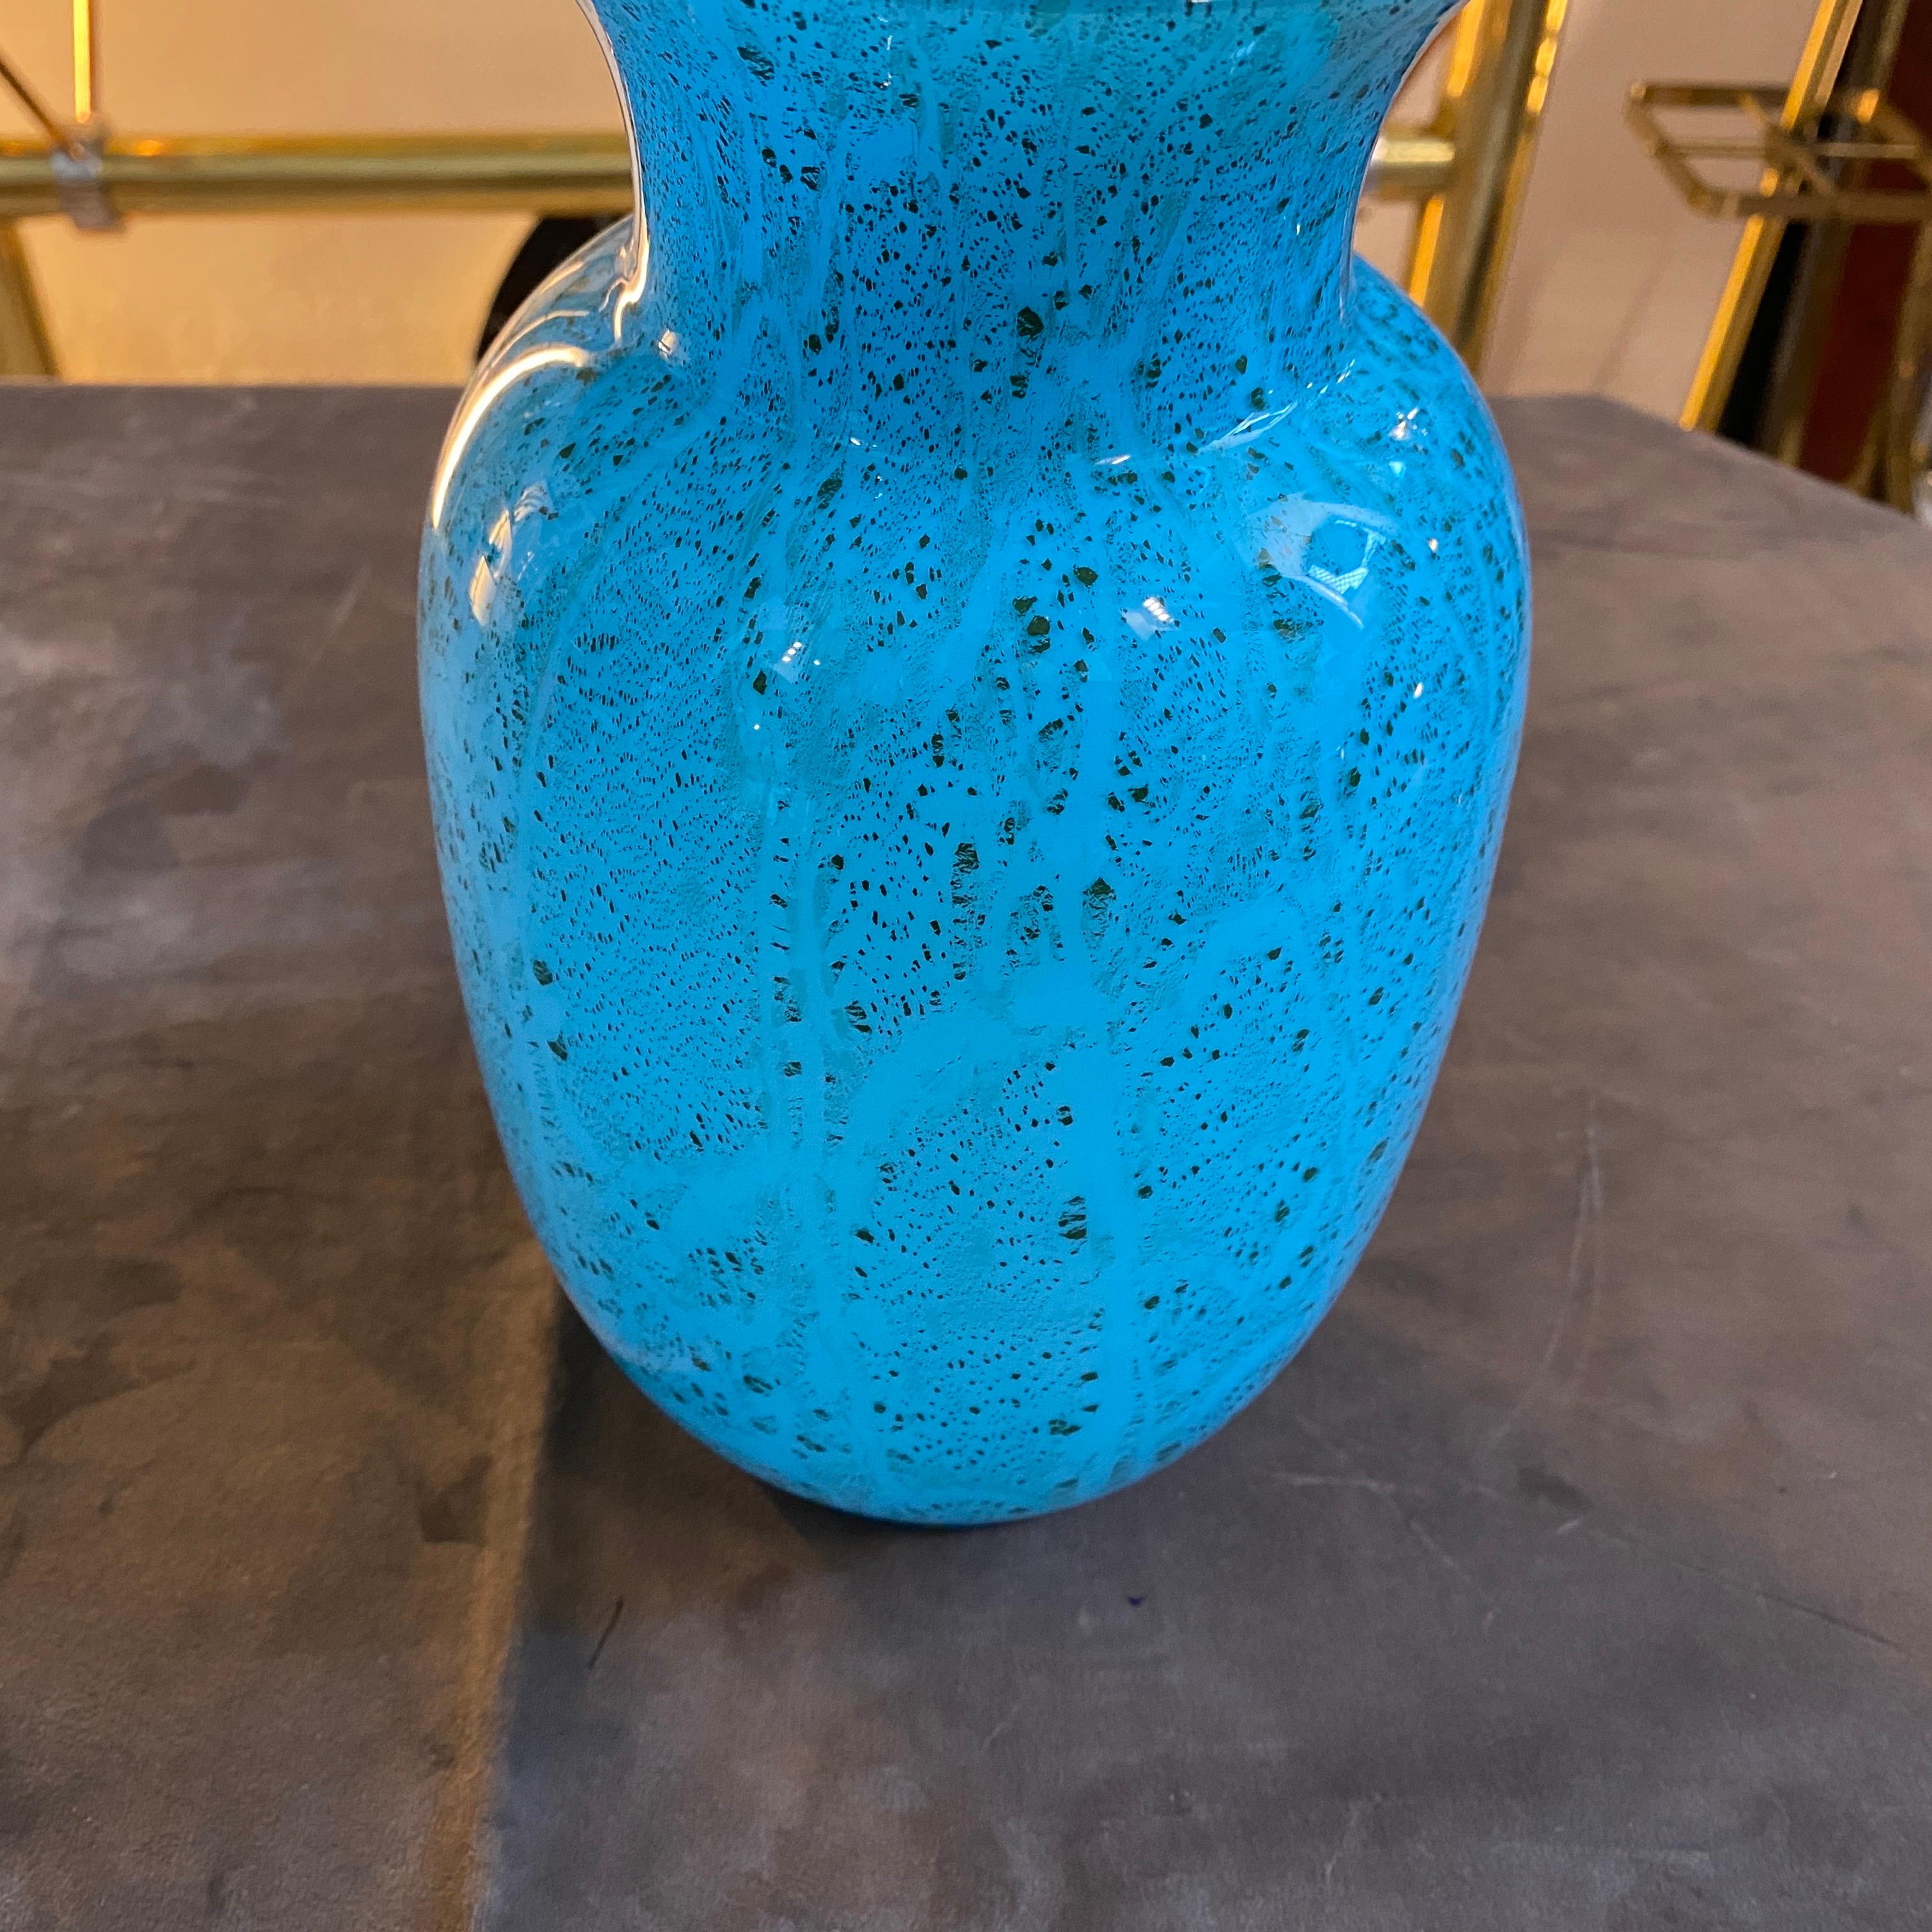 1980s Modernist Turquoise and Black Murano Glass Vase by VeArt For Sale 5